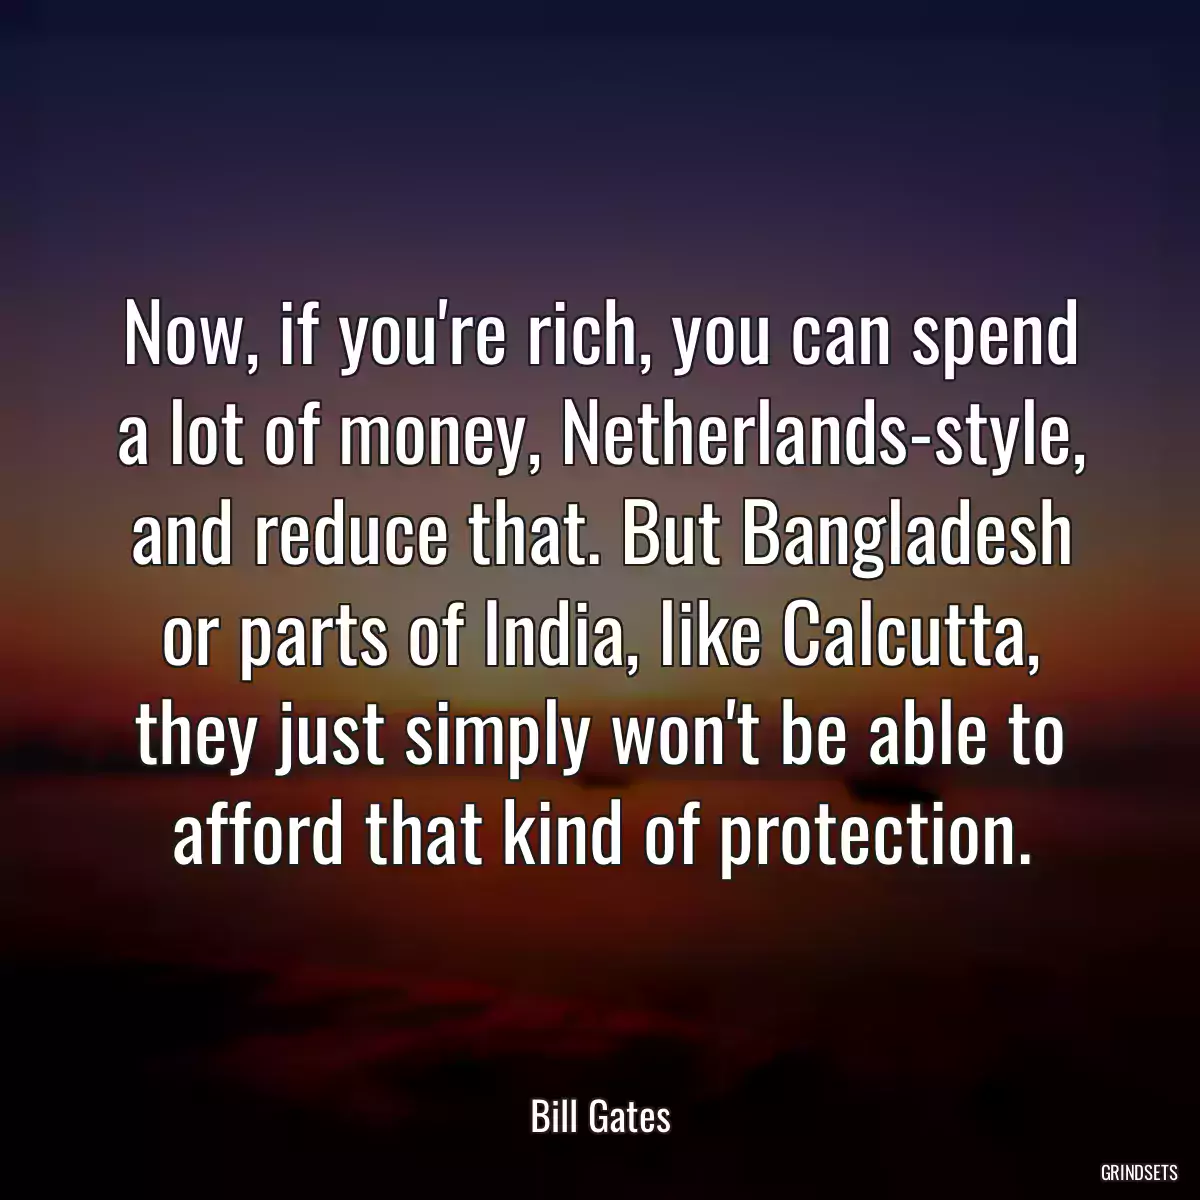 Now, if you\'re rich, you can spend a lot of money, Netherlands-style, and reduce that. But Bangladesh or parts of India, like Calcutta, they just simply won\'t be able to afford that kind of protection.